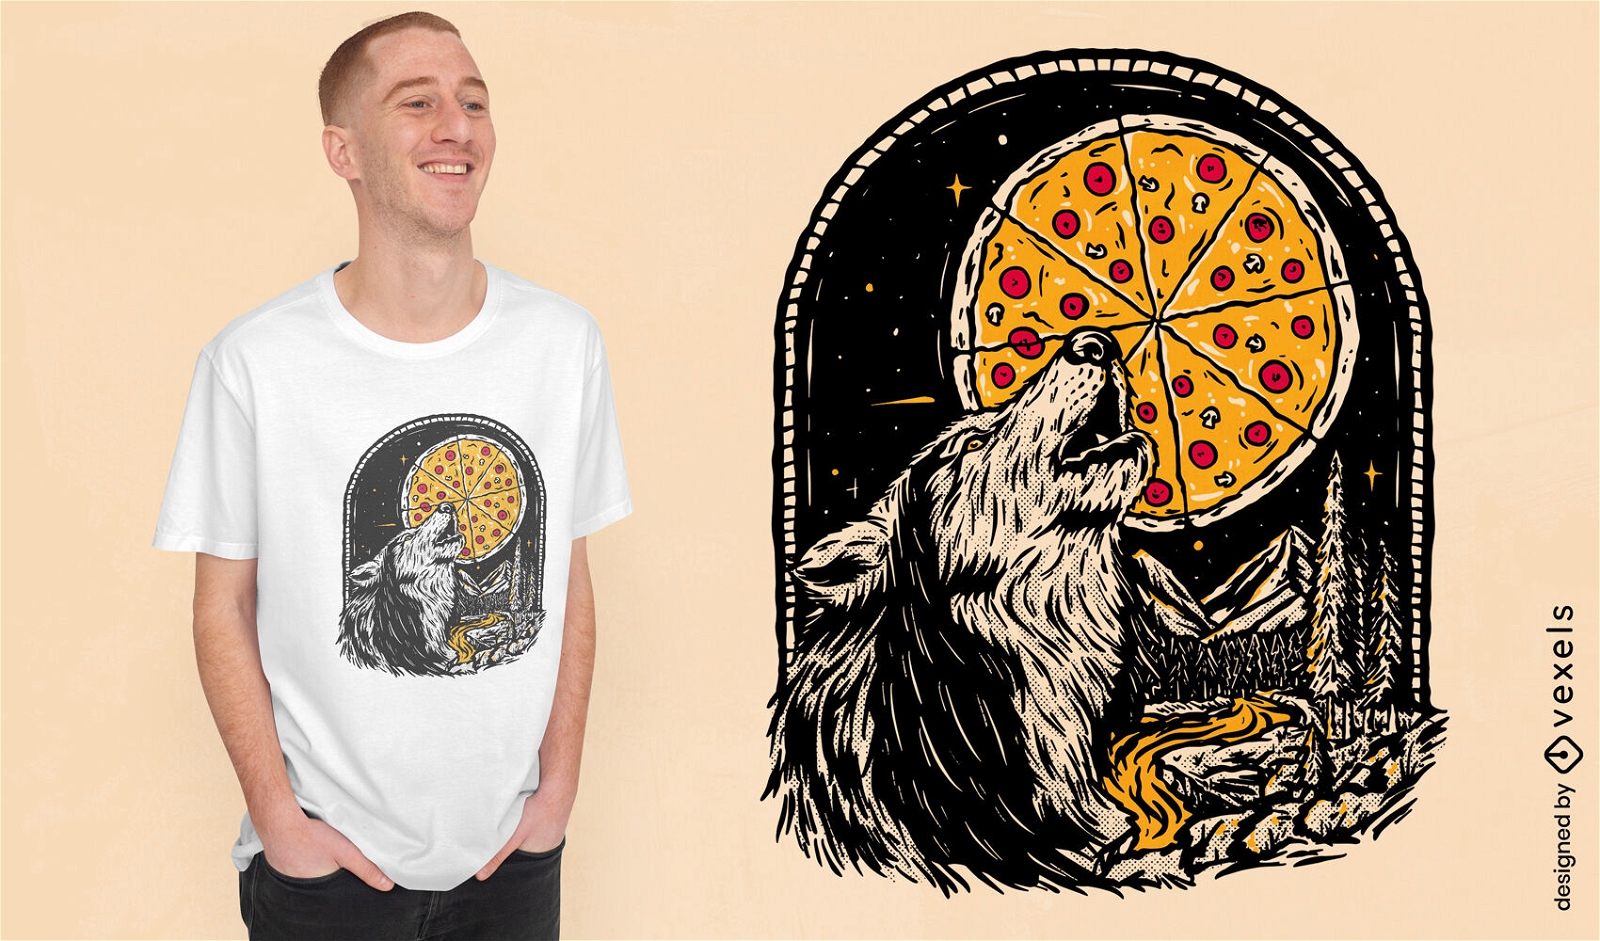 Wolf howling at full pizza moon t-shirt design